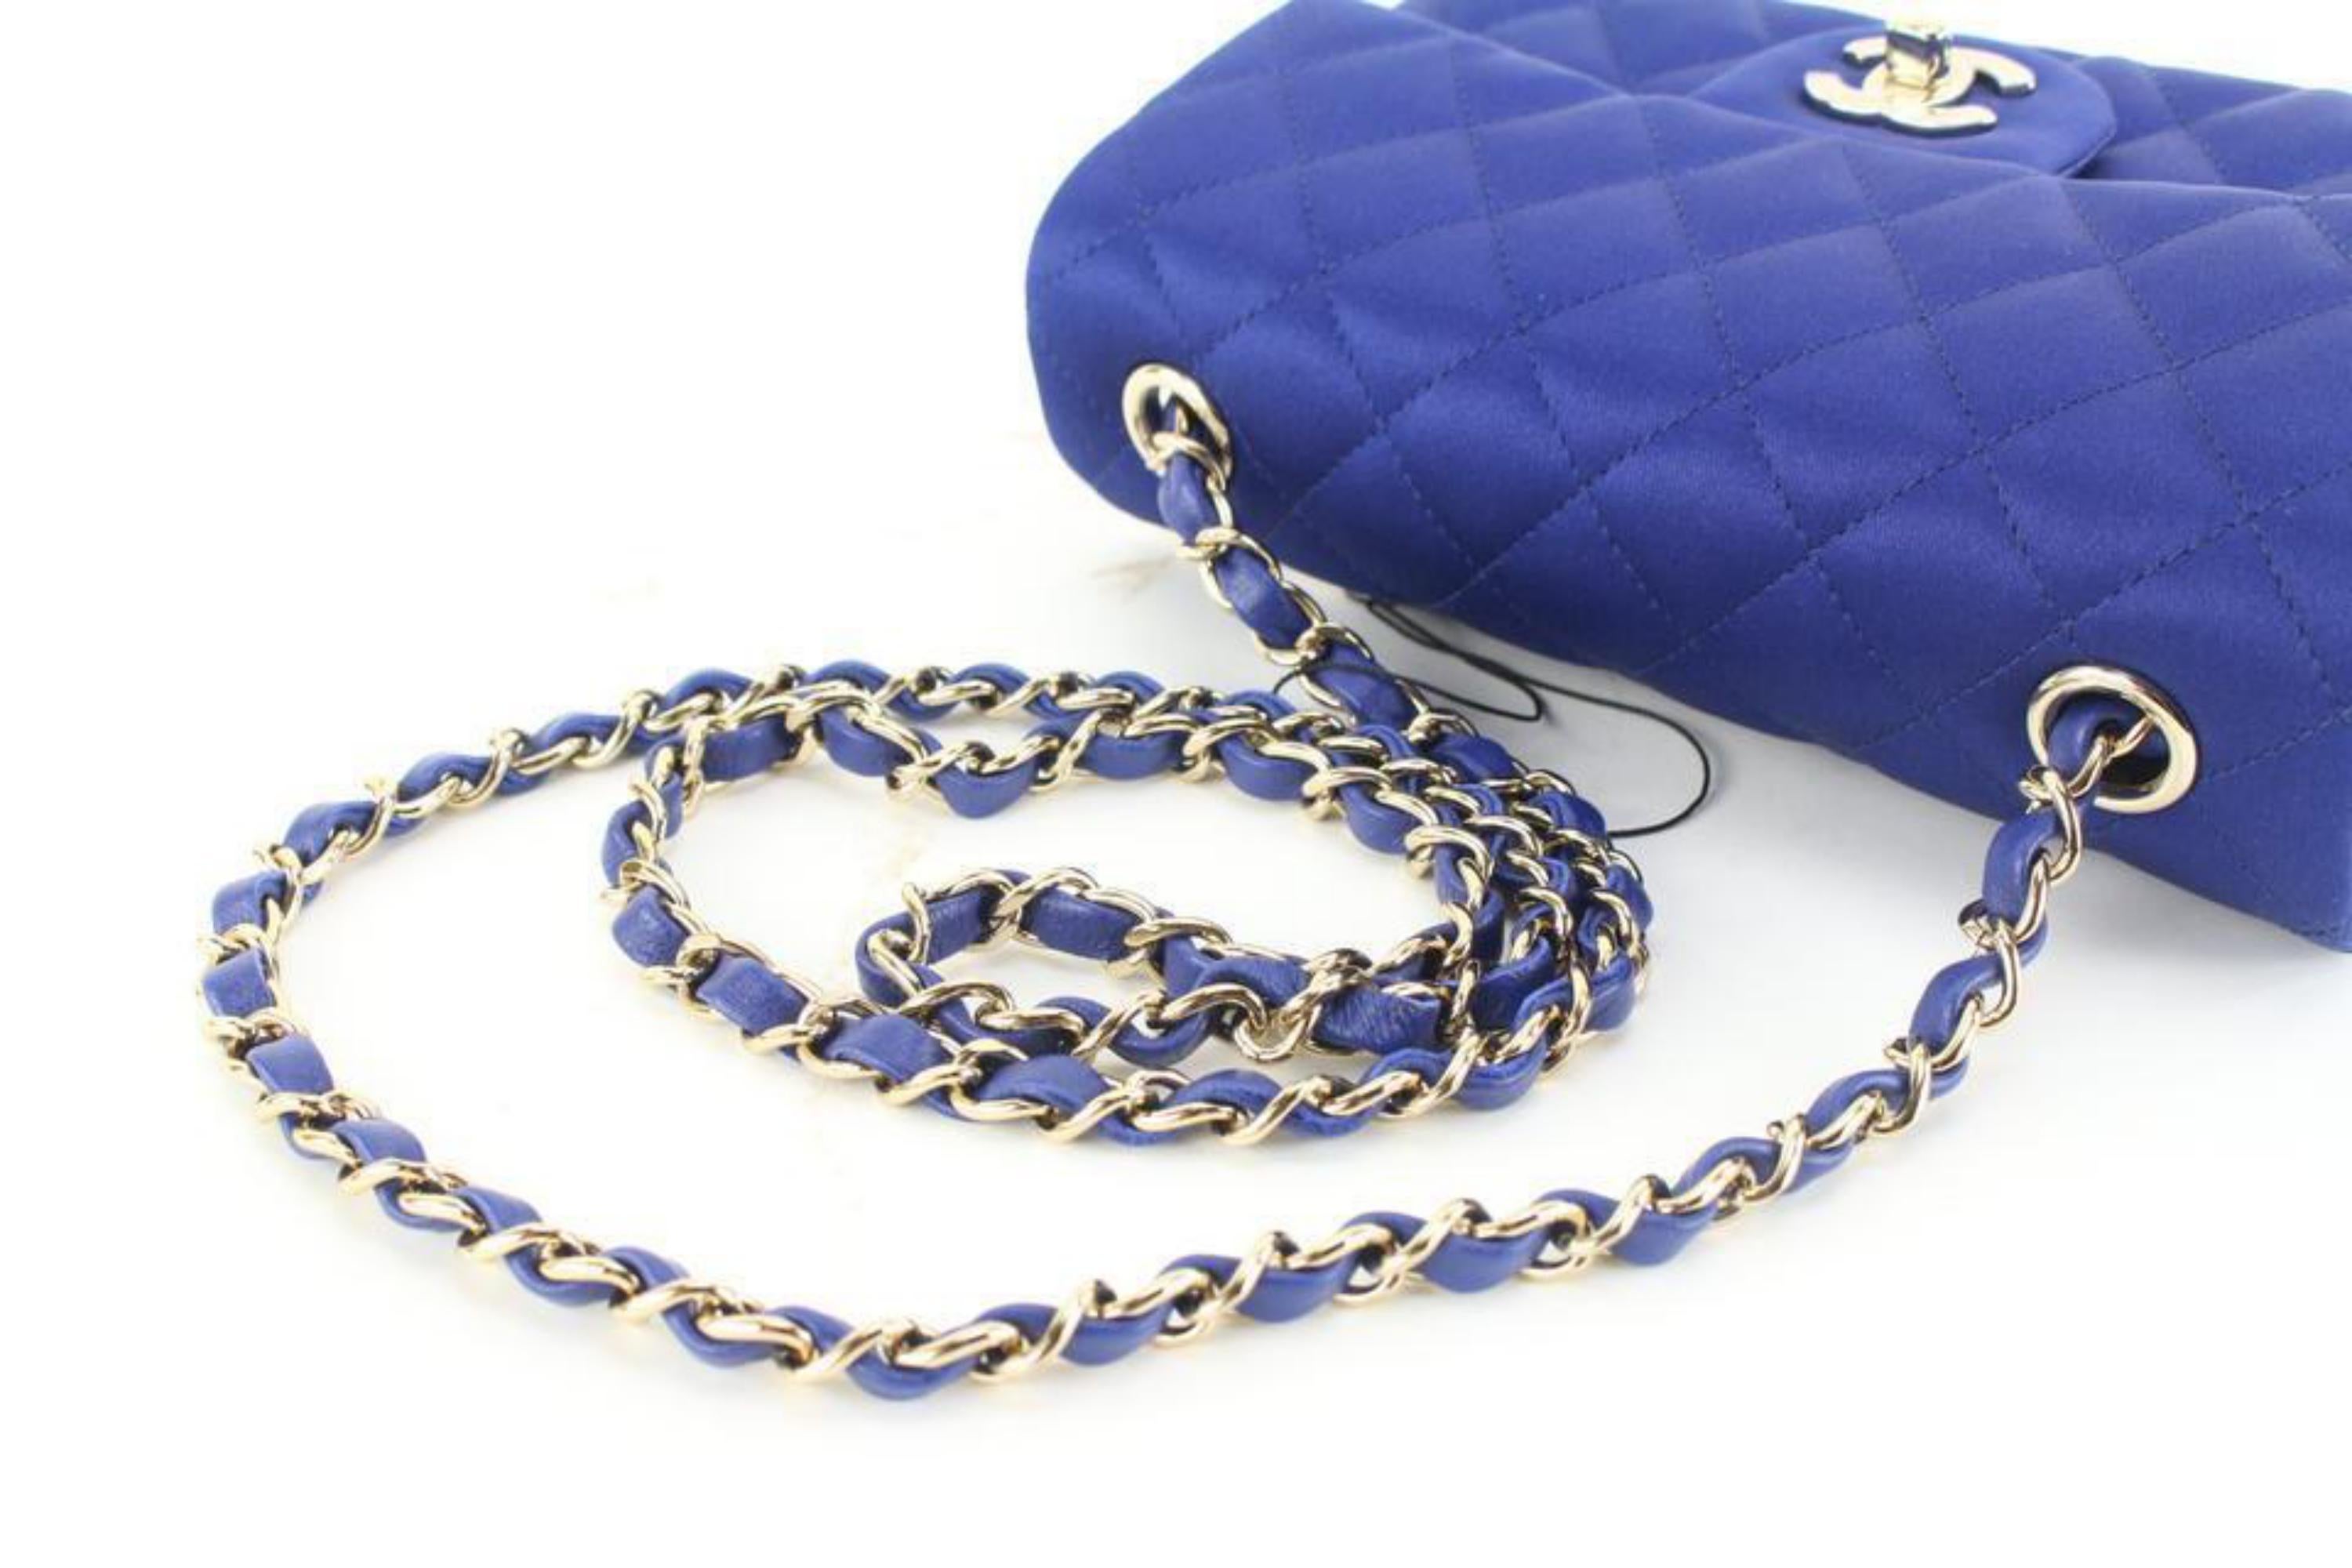 Women's Chanel 22A Rare Blue Quilted Satin Mini Classic Flap GHW 9c118